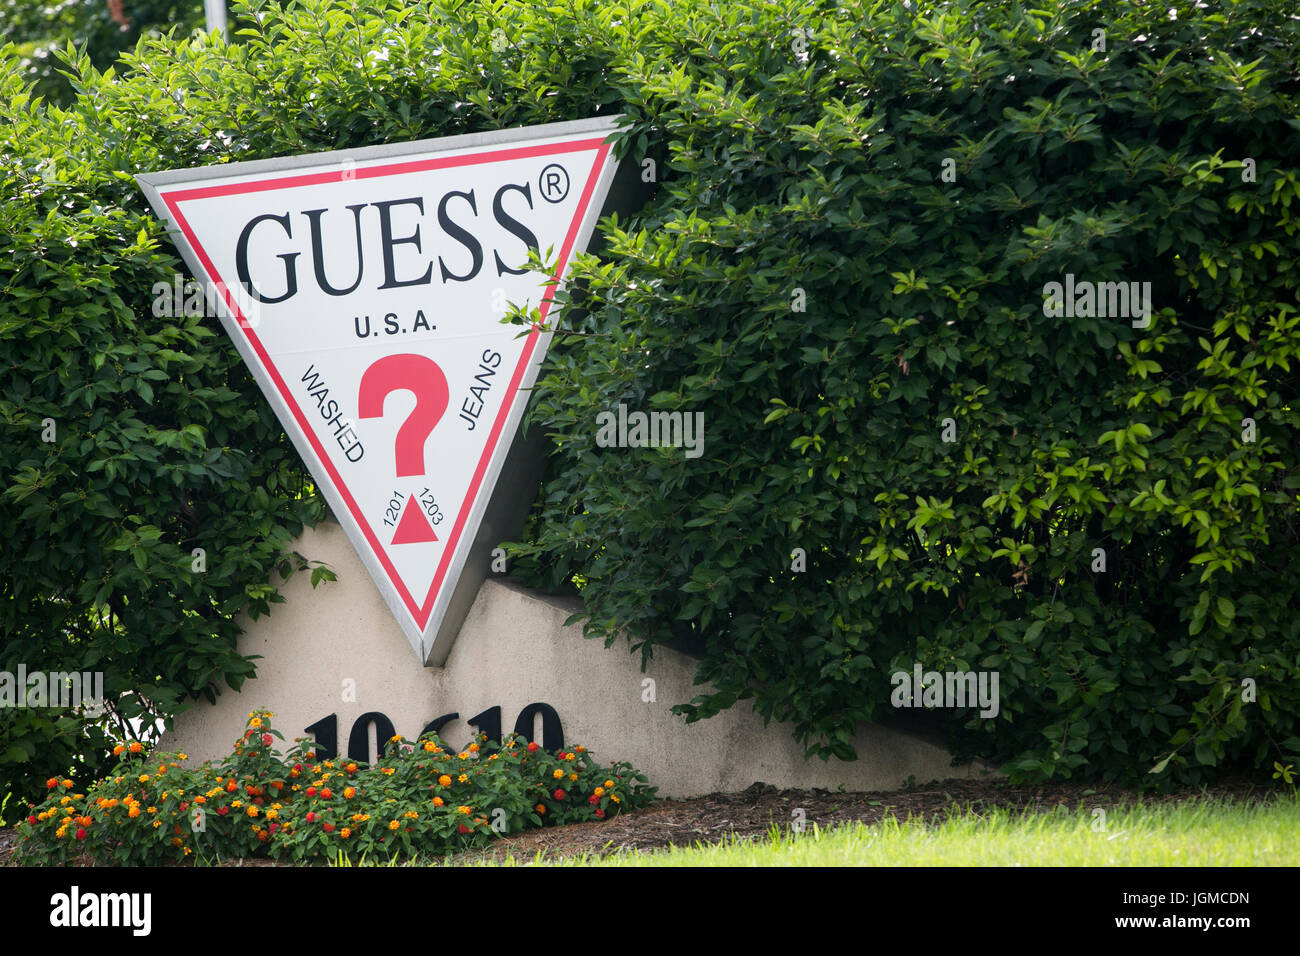 Page - Sign High Resolution Stock Photography Images - Alamy